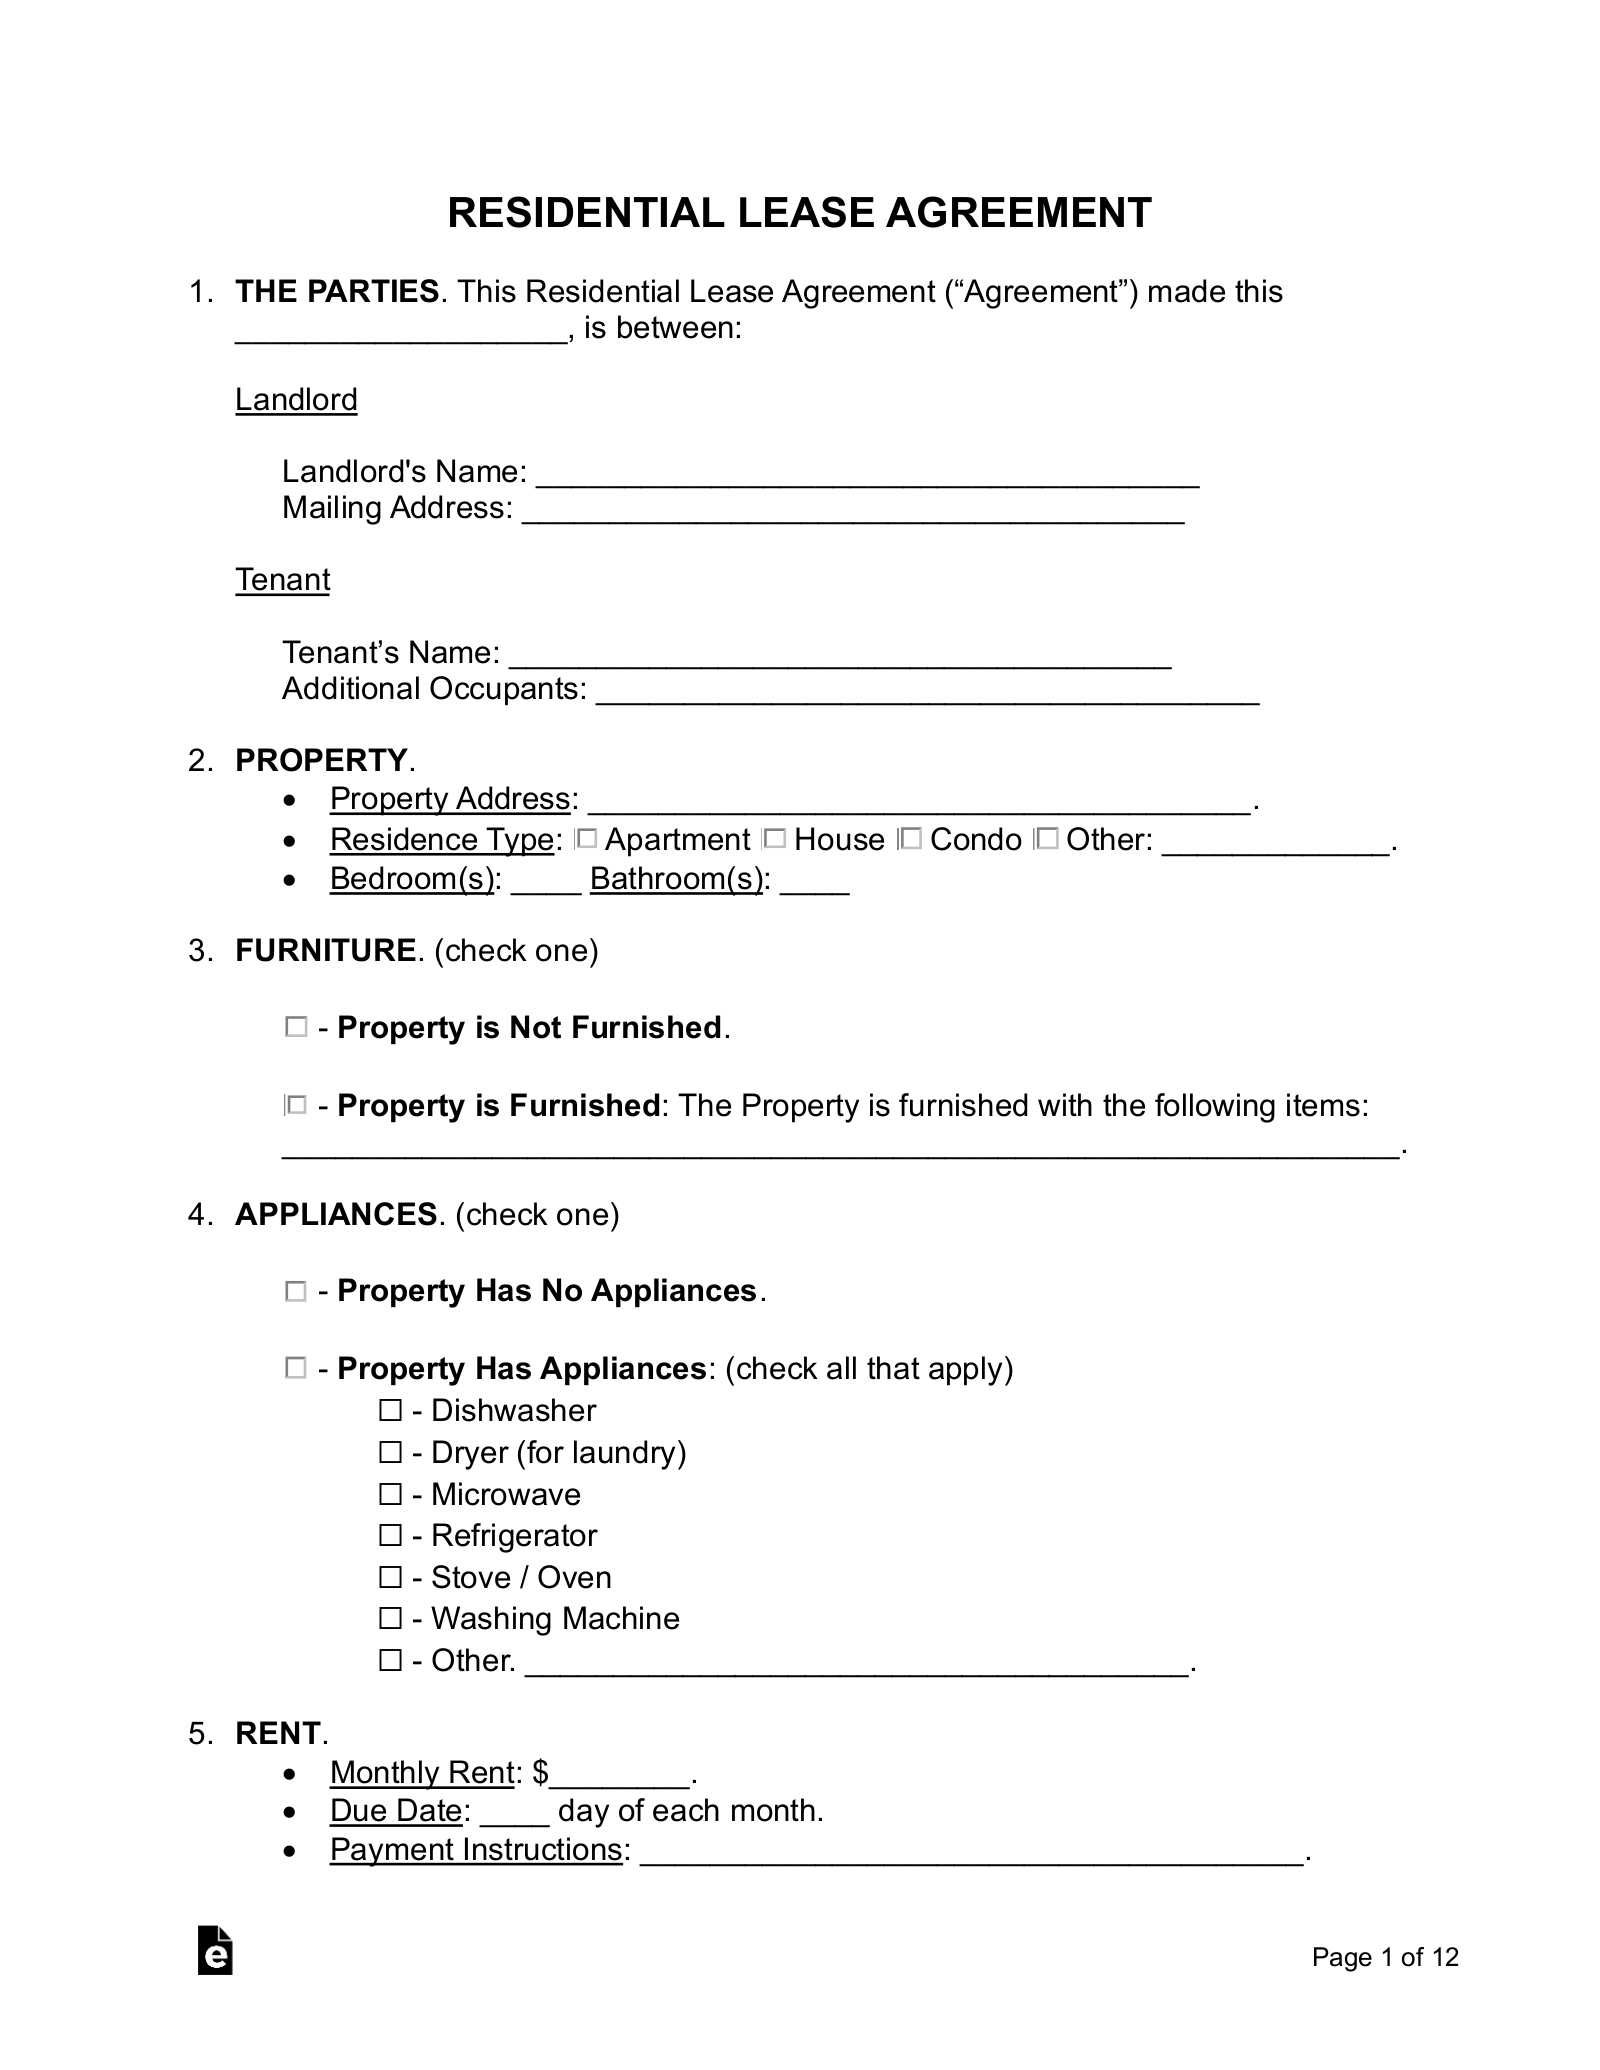 Free Rental / Lease Agreement Templates (15) - Pdf | Word – Eforms - Free Lease Agreement Online Printable